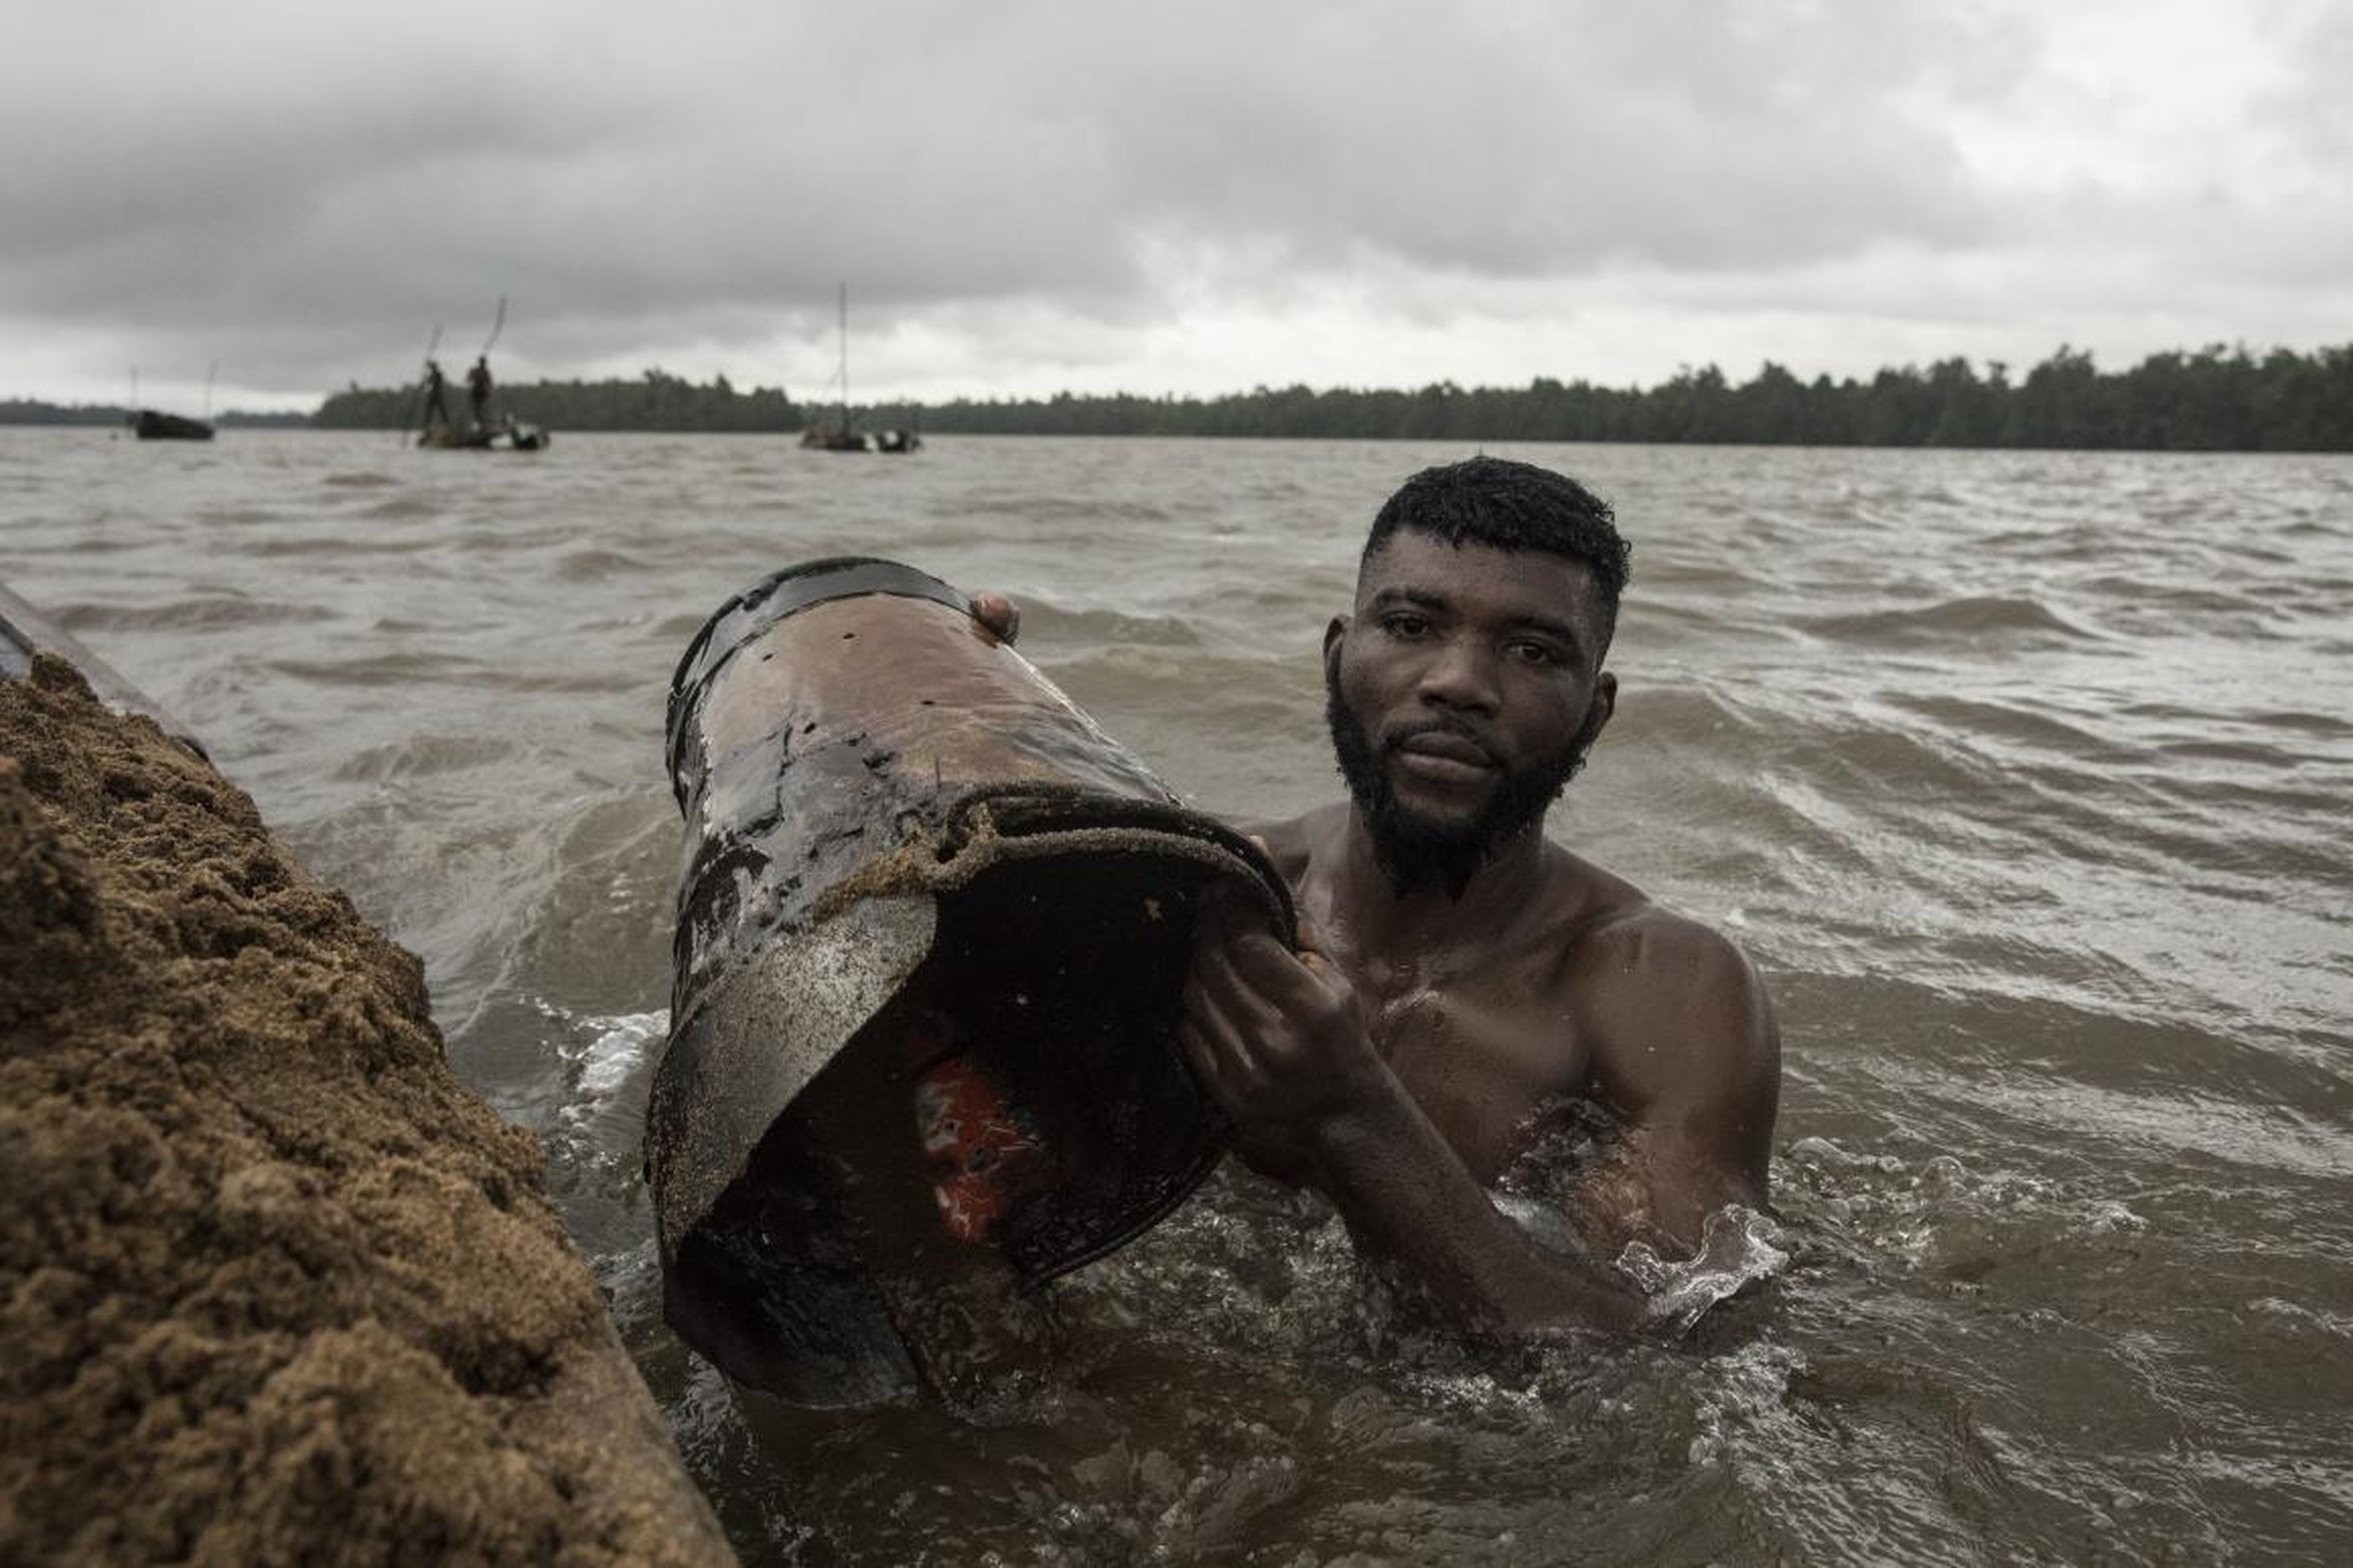 6. Sand divers in Cameroon retrieve around 1.7 tonnes of sand each in a roughly three-hour shift. "The work was brutal and dangerous and the miners dived around the low tide." Deaths occurred during Brown's time there in 2017,